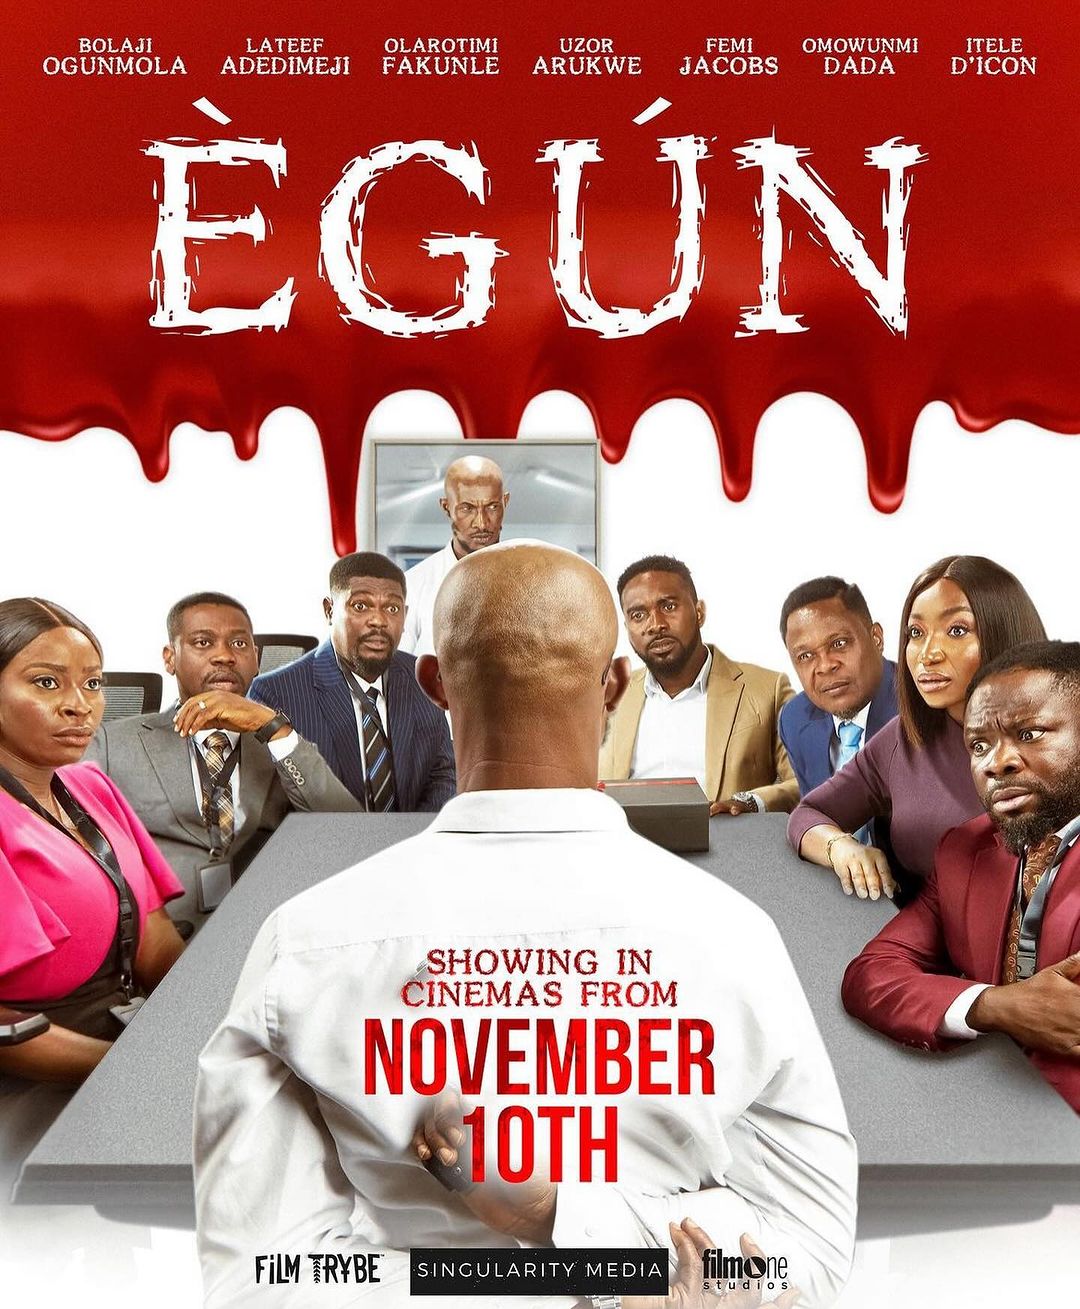 396735322 18119029492321845 7705890662180616899 n - Amazing Nollywood Box Office Titles on our Radar, This November!